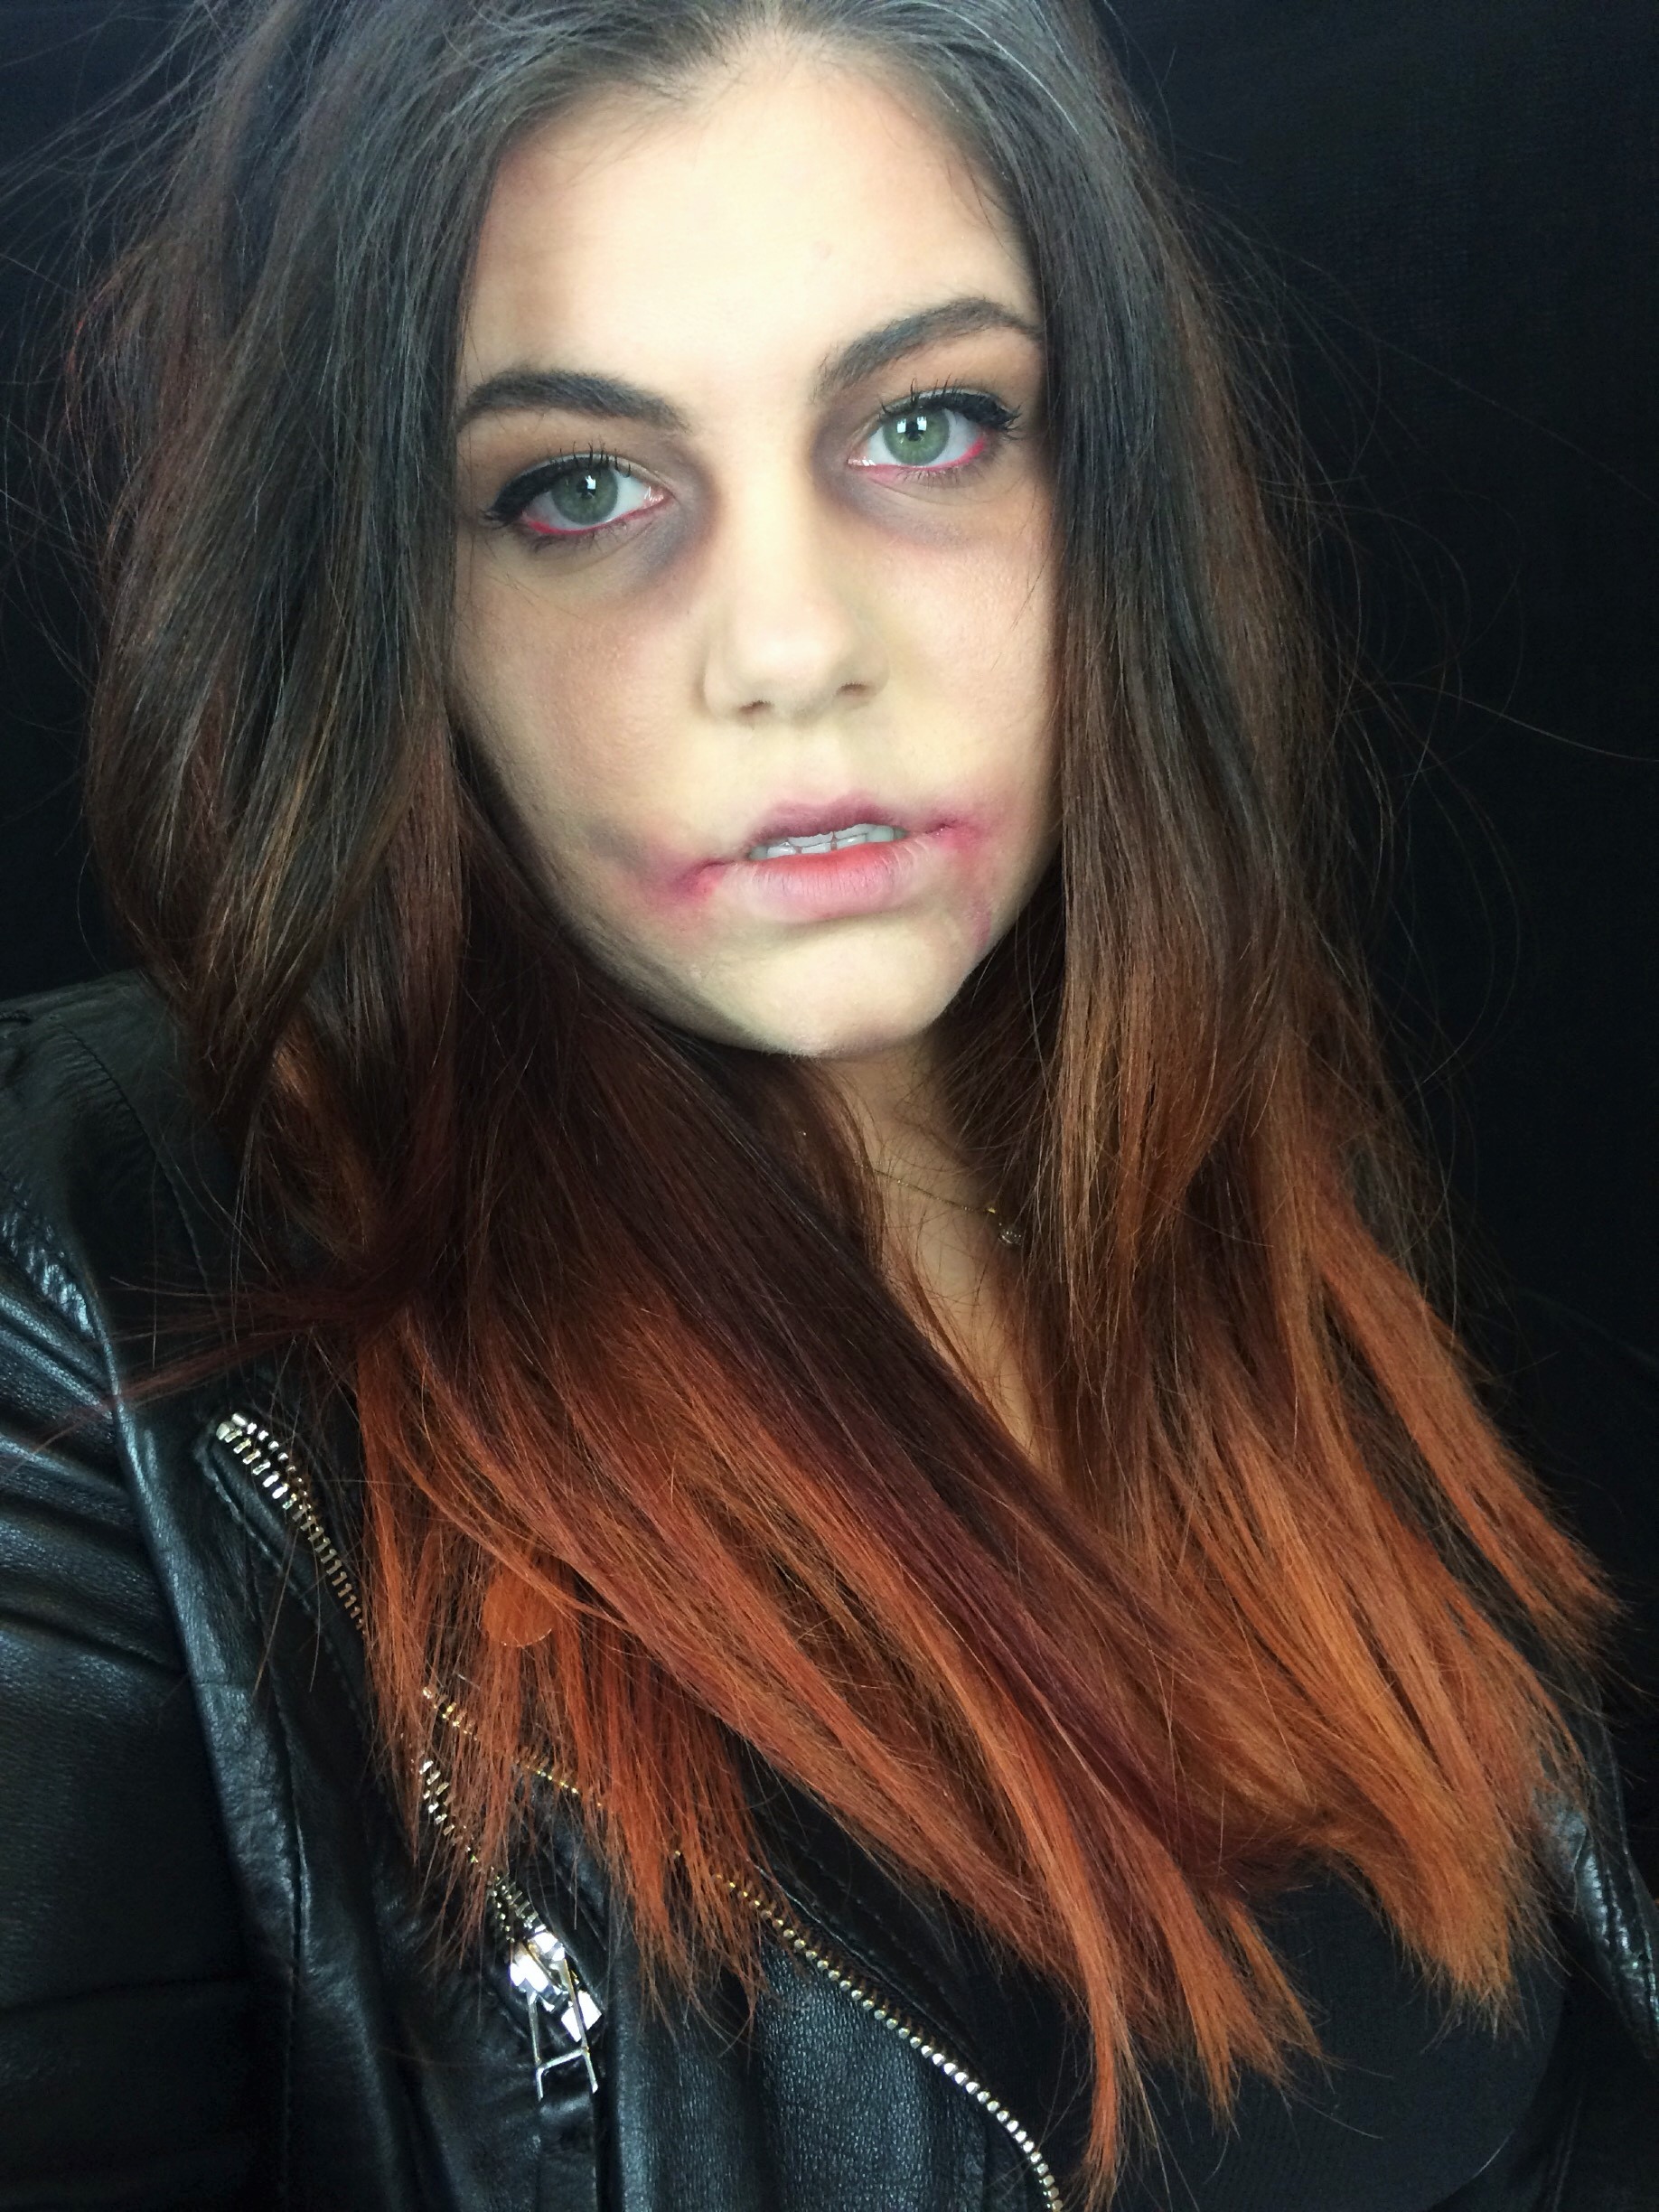 How To Look Dead Zombie Make Up [Click To See How I Got This Look]